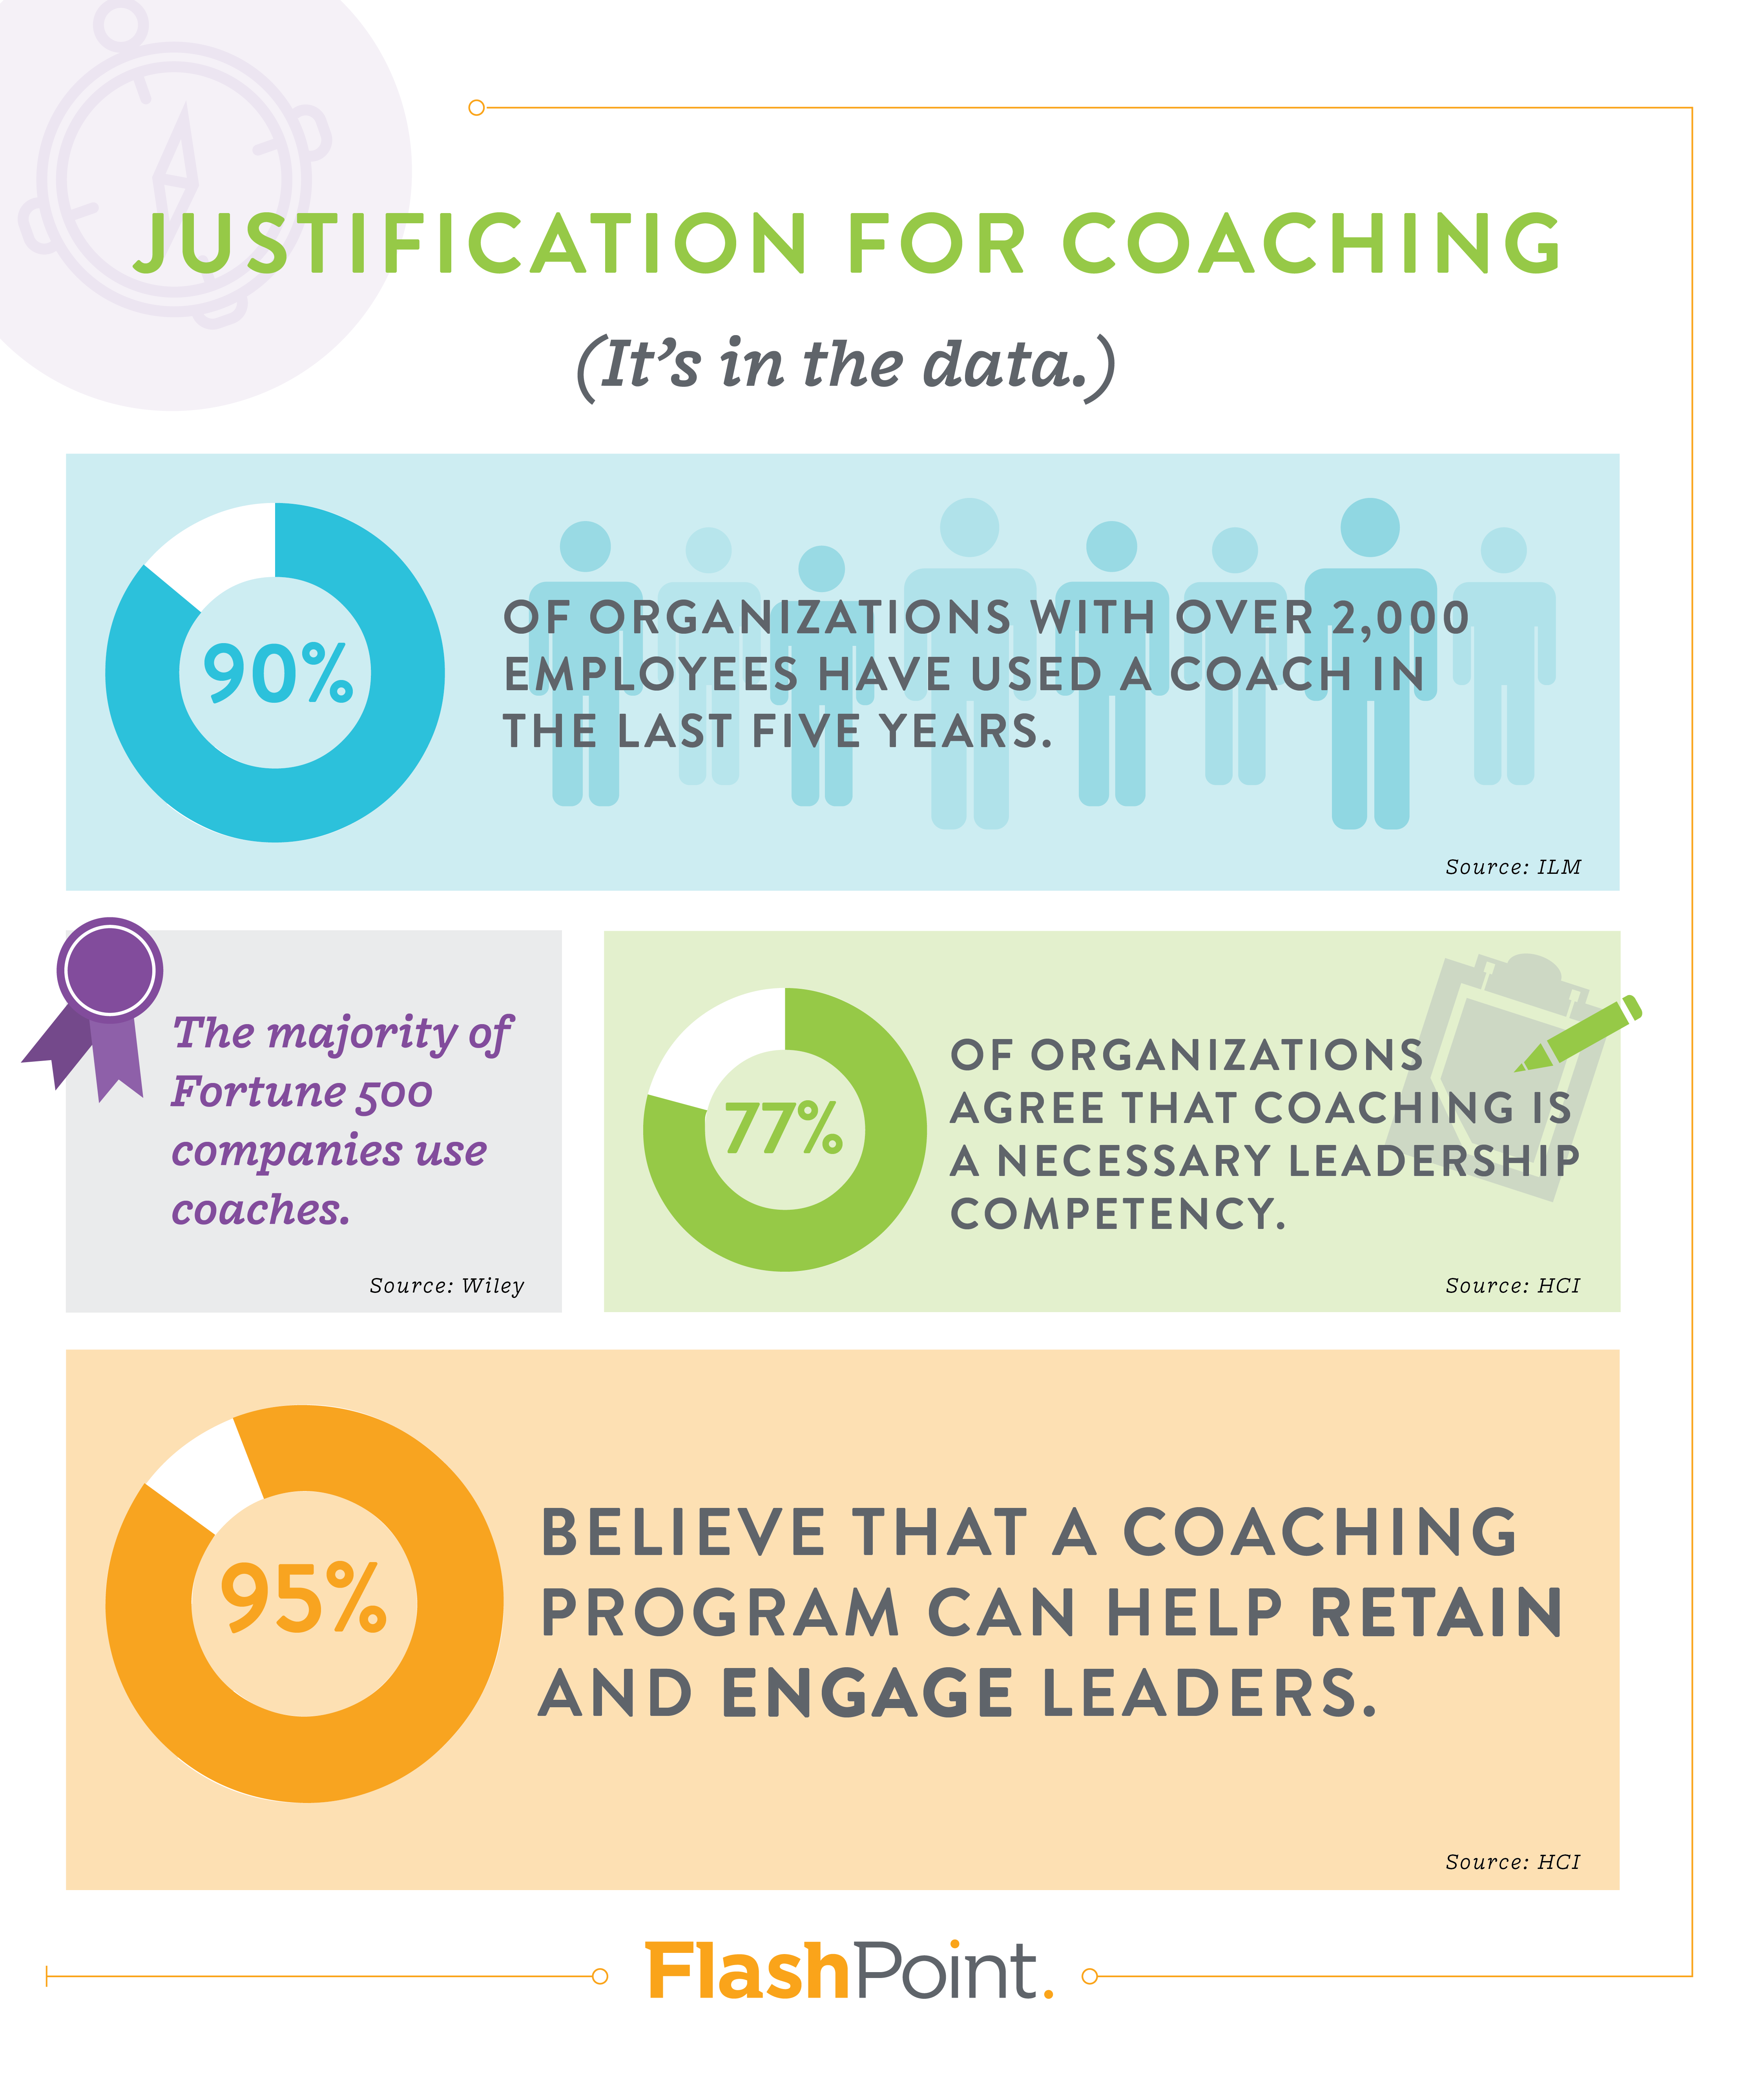 Trends and Benefits of Coaching in the Workplace